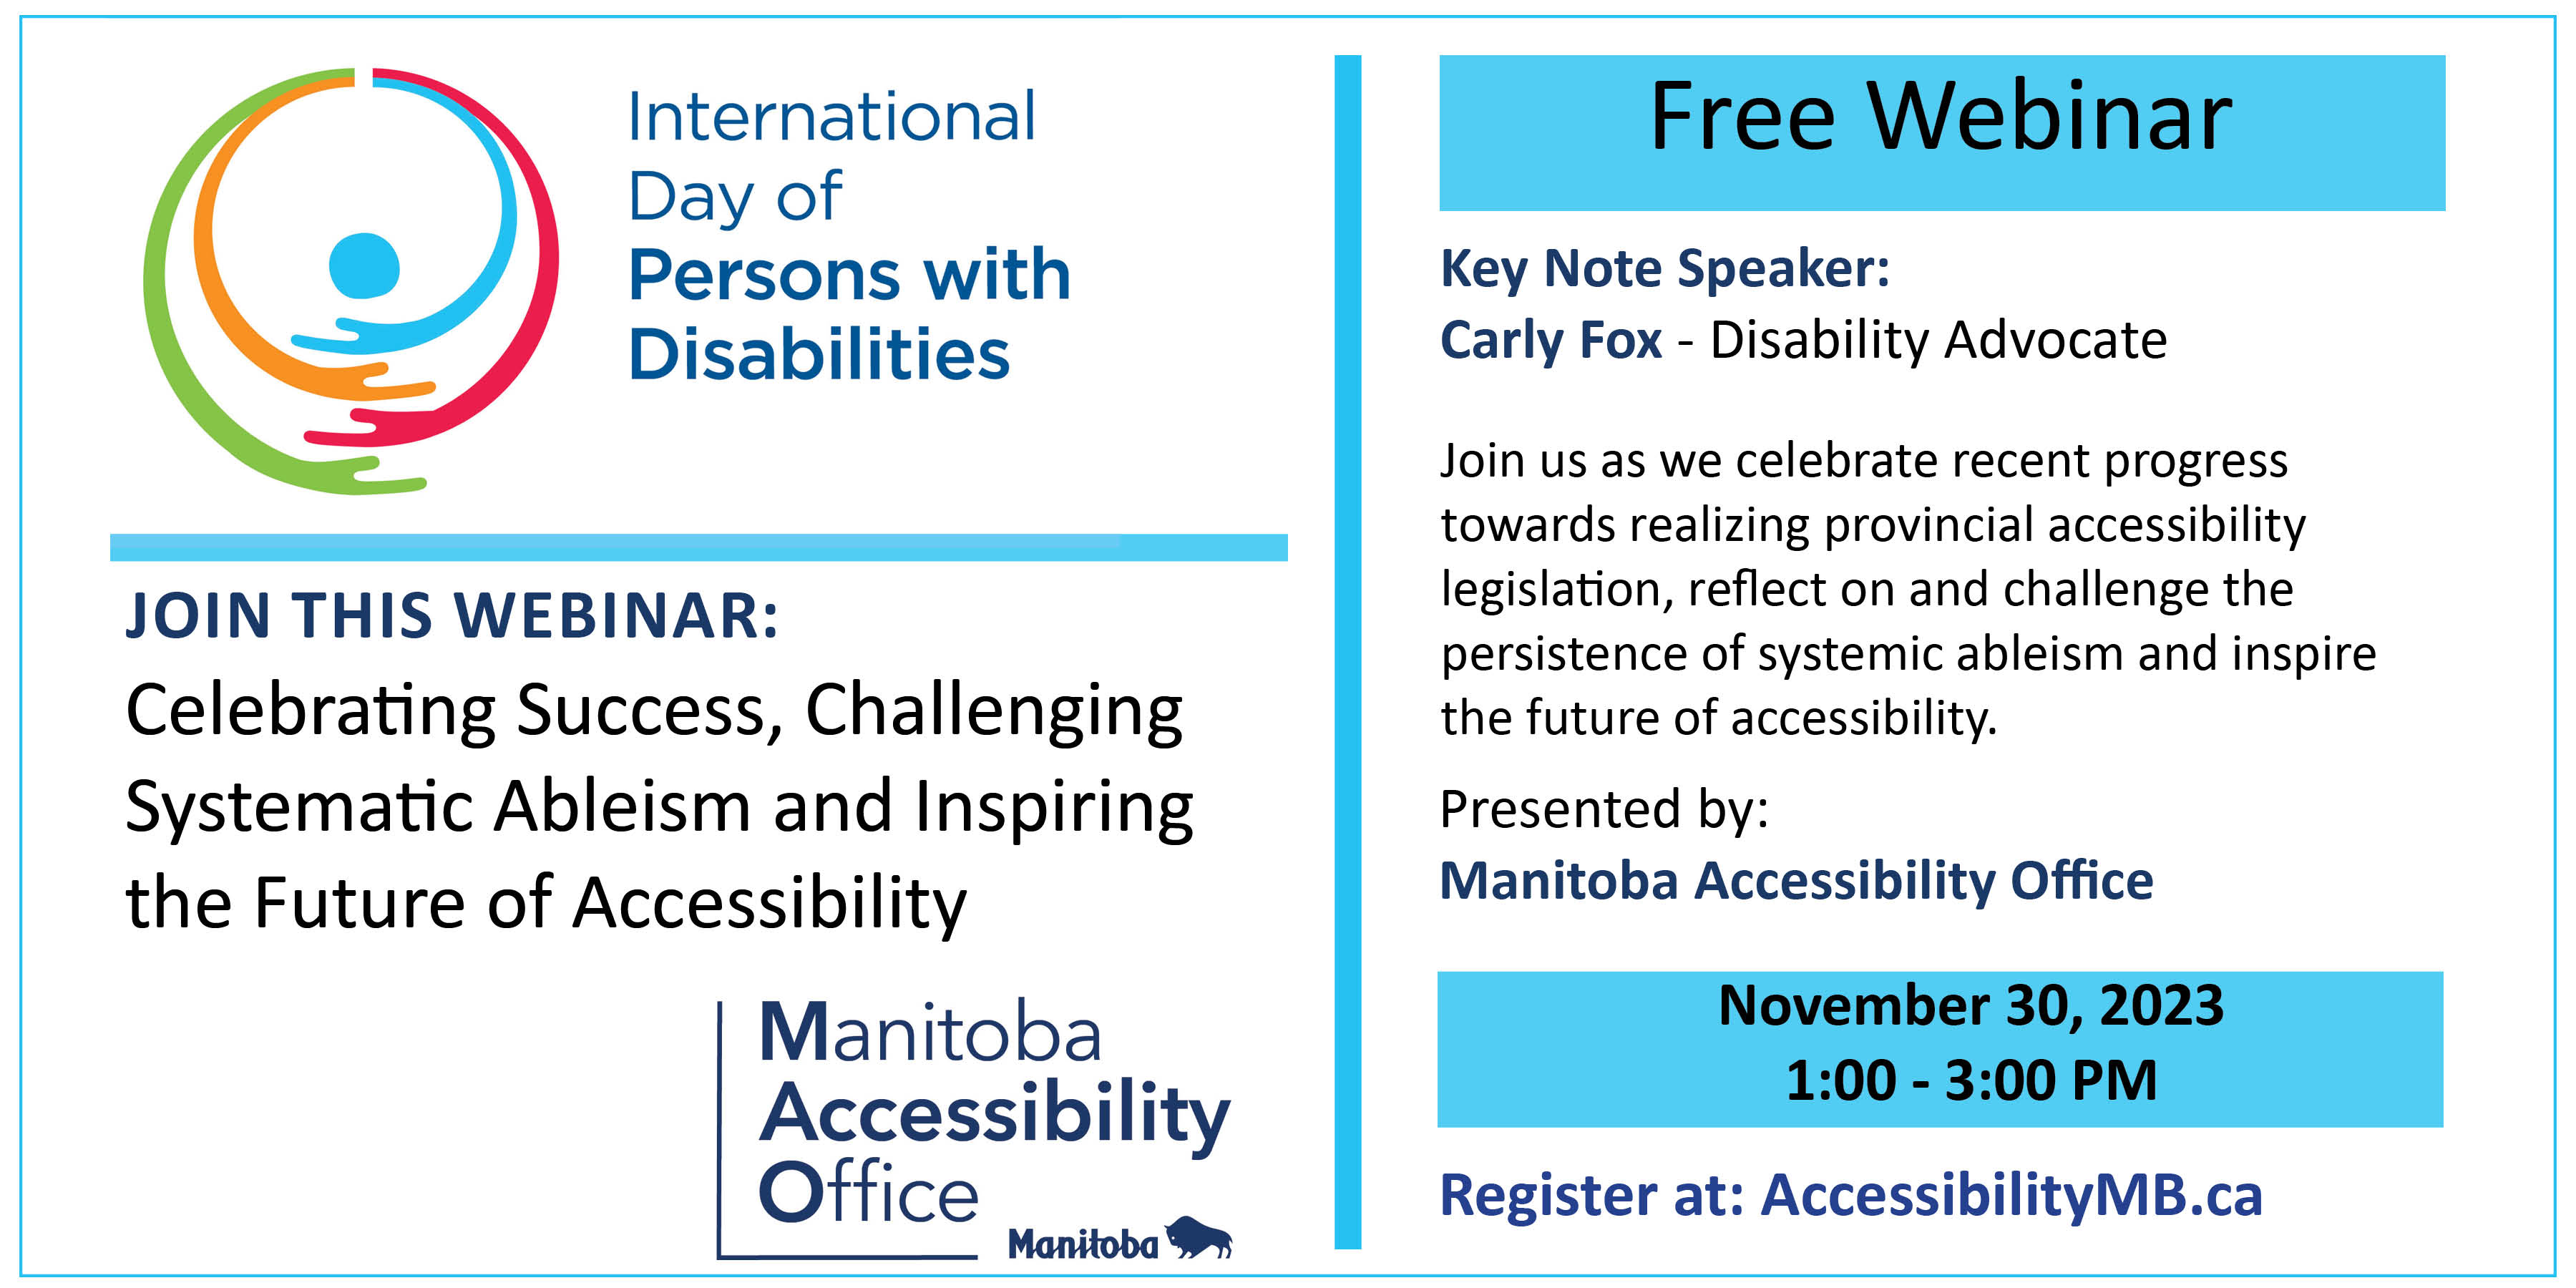 Internation Day of Persons with Disabilities. Free Webinar November 30,2023